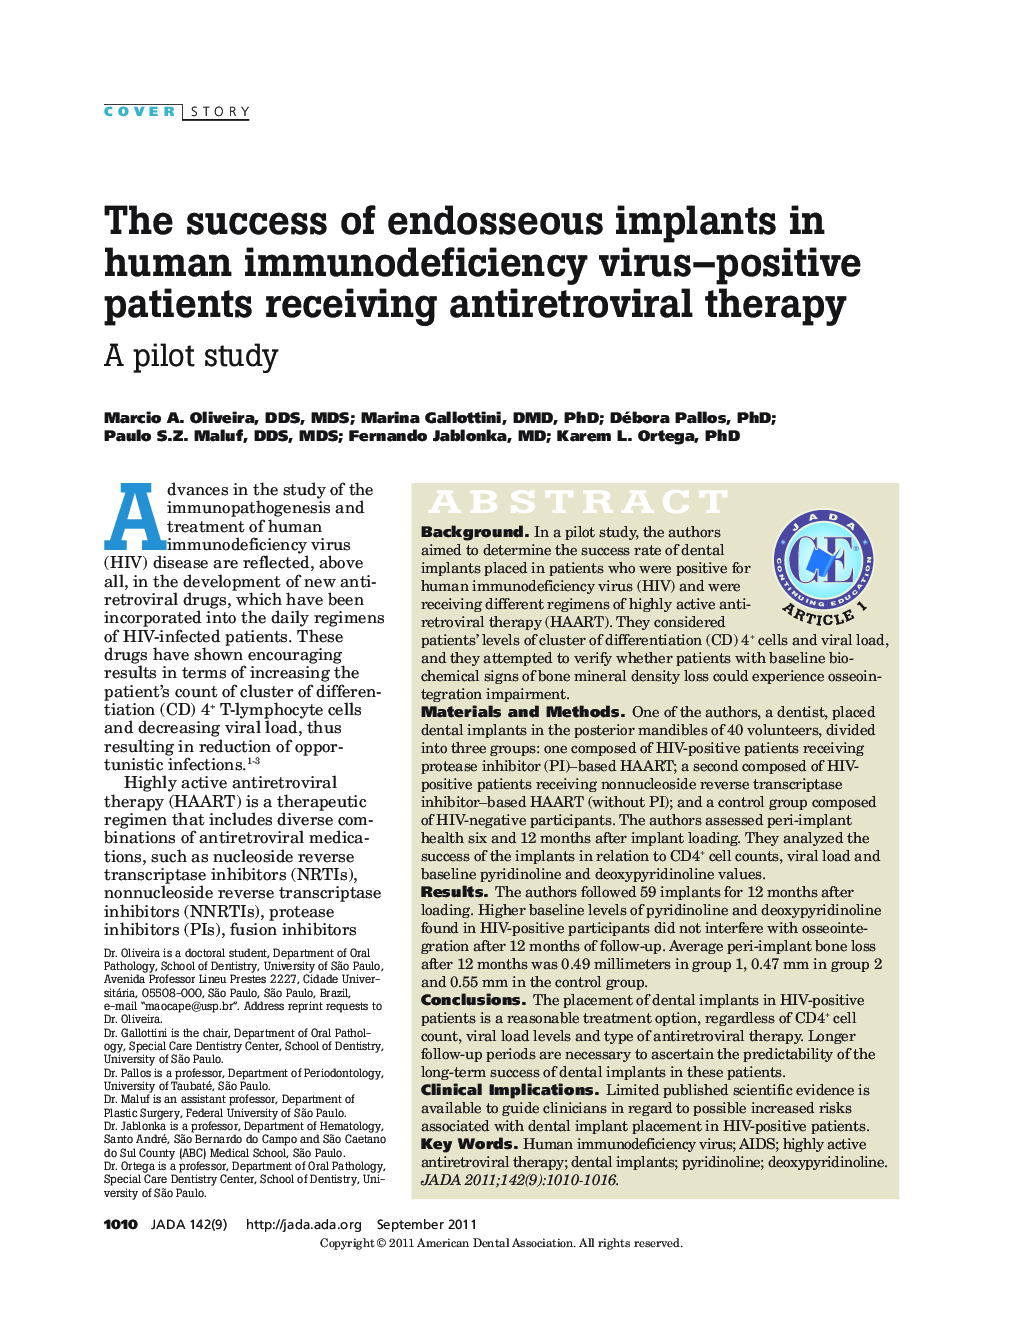 The success of endosseous implants in human immunodeficiency virus–positive patients receiving antiretroviral therapy : A pilot study